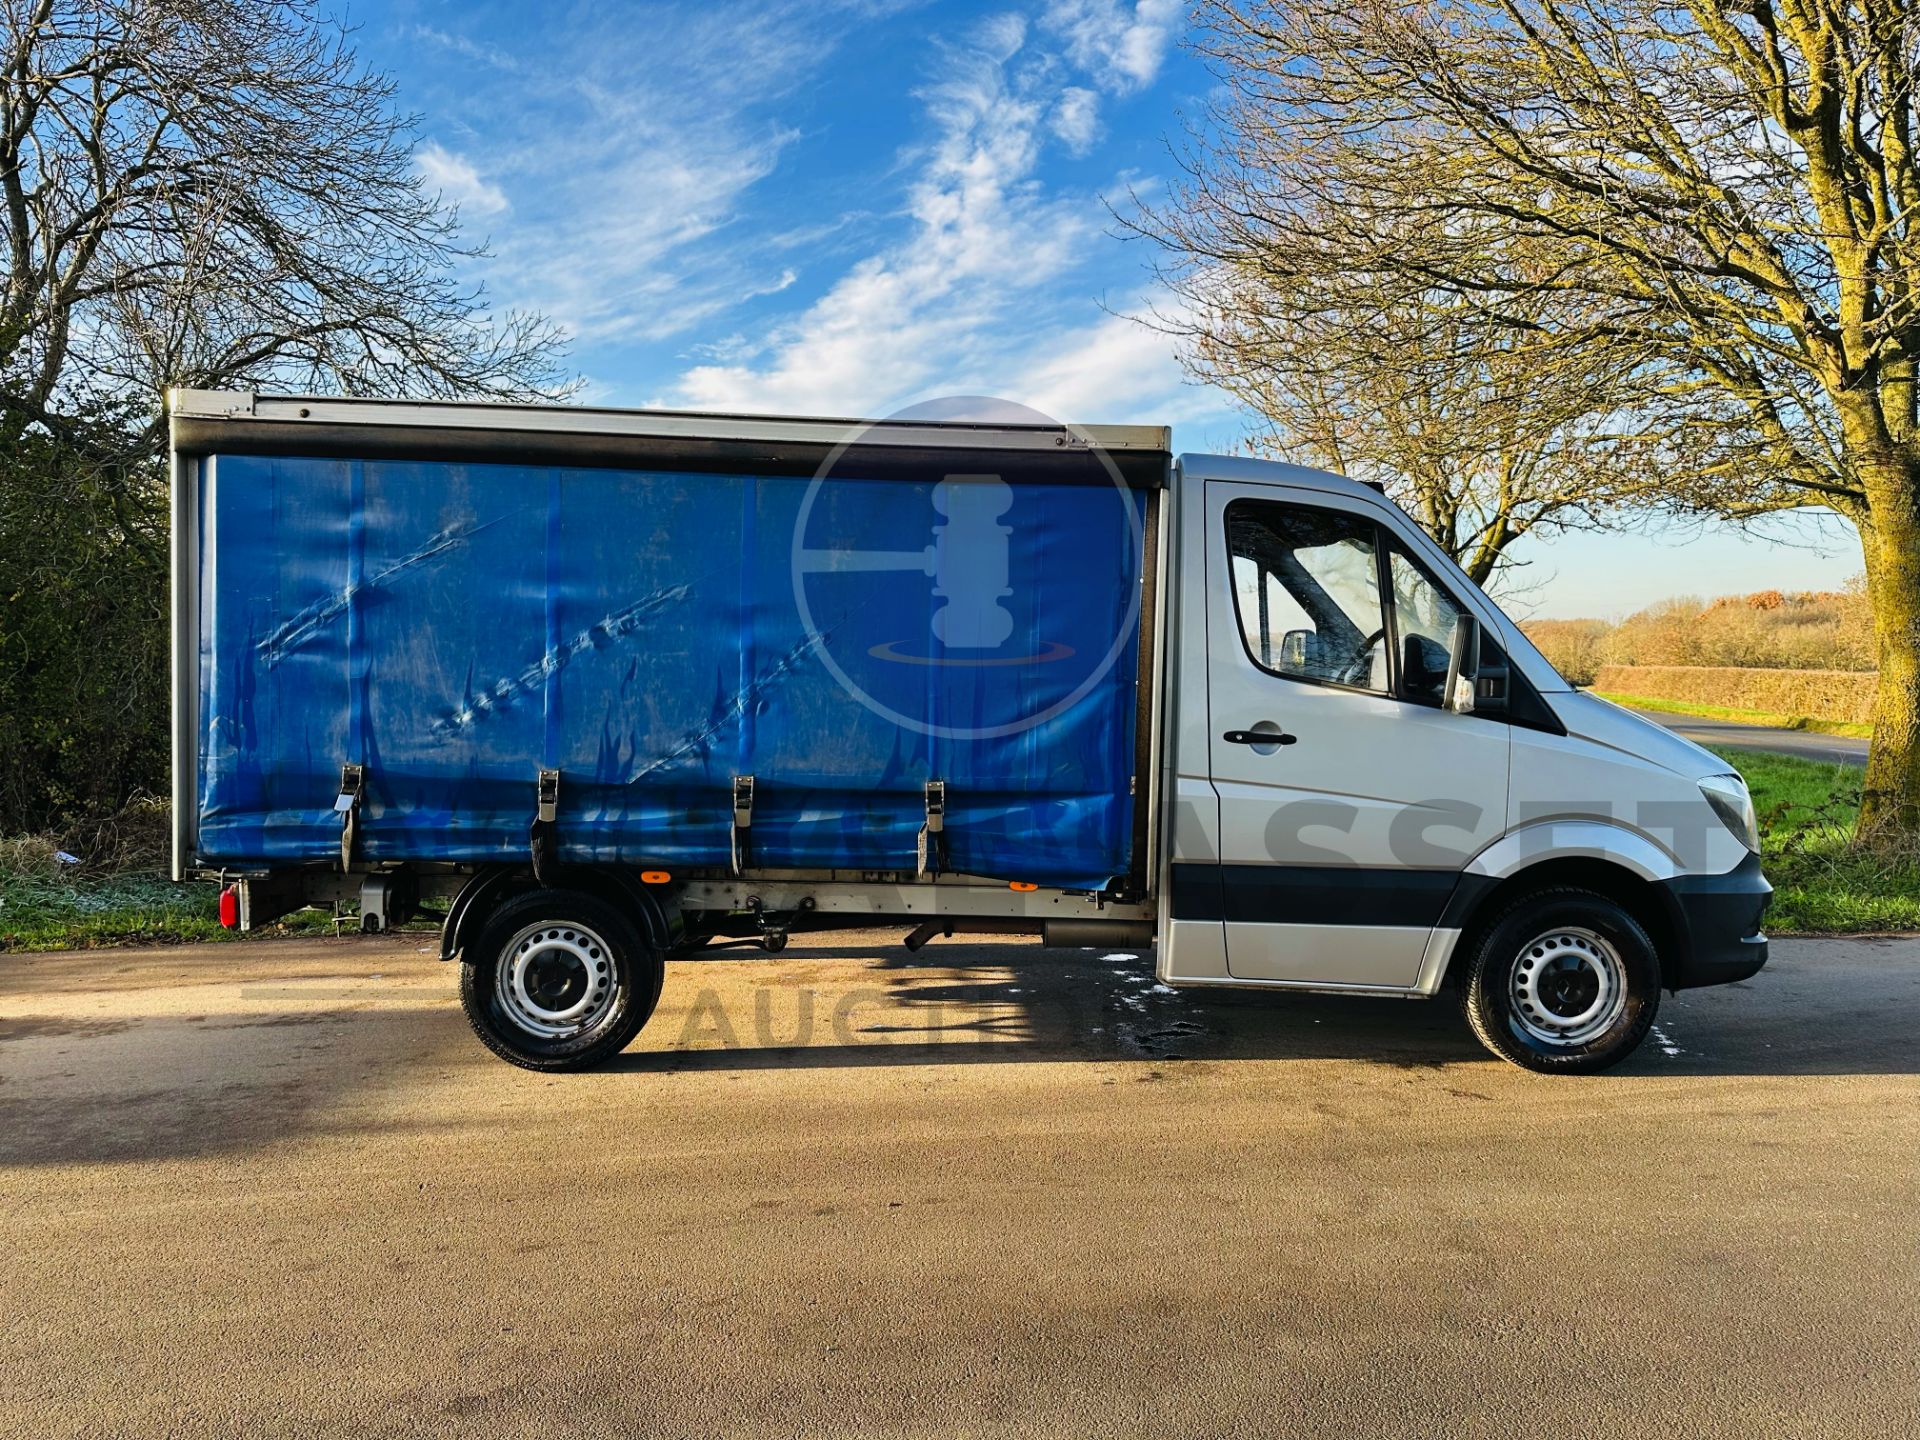 MERCEDES-BENZ SPRINTER 313 CDI - *LWB CURTAINSIDER TRUCK* - 2016 MODEL - 3 SEATER CABIN - AIR CON!!! - Image 10 of 26